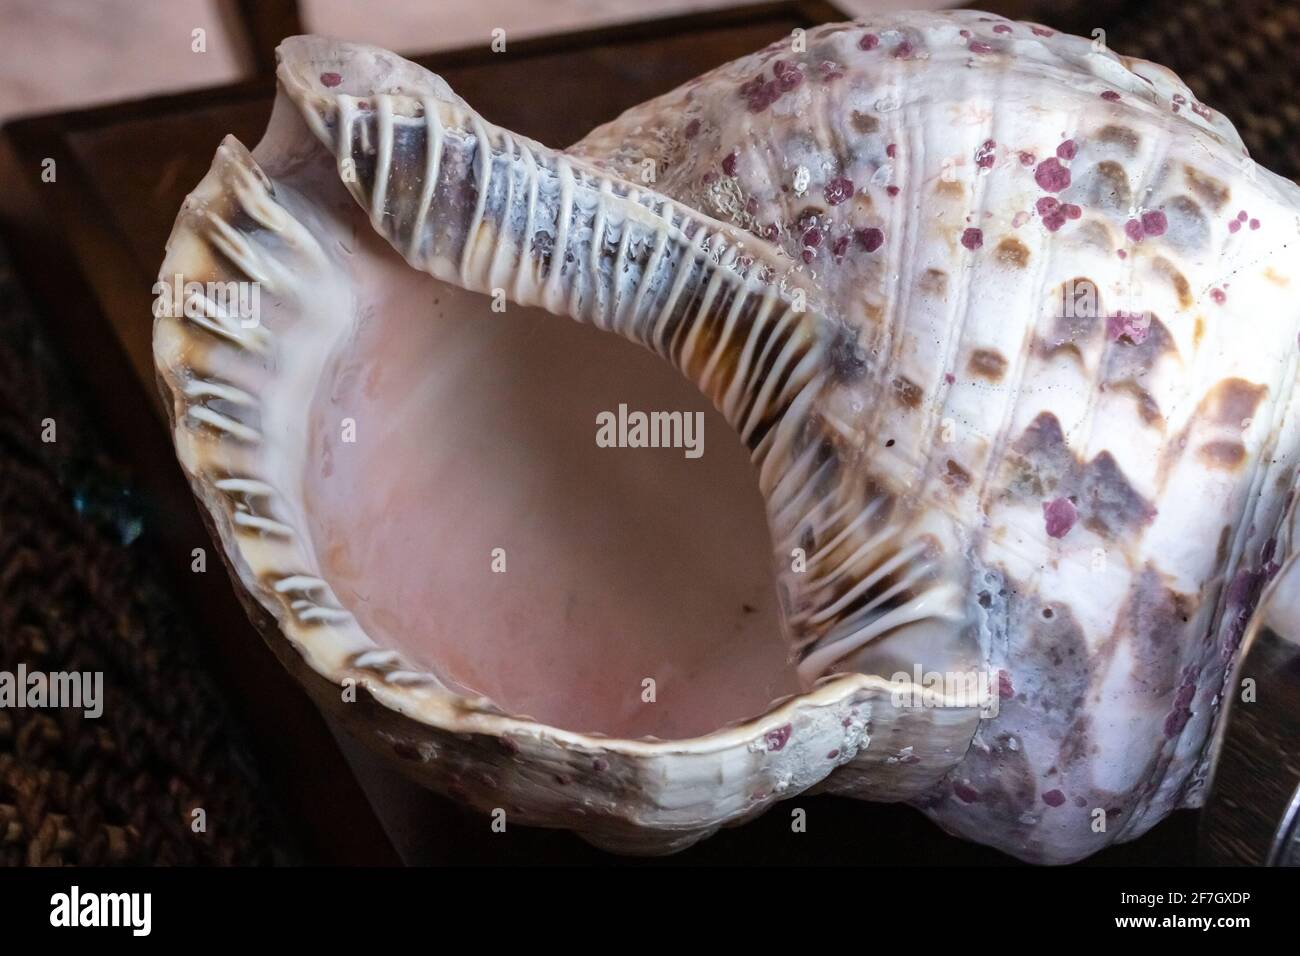 A giant Triton's trumpet shell, or Charonia tritonis, on a dark wooden background February 2021 in Ontario, Canada. Stock Photo